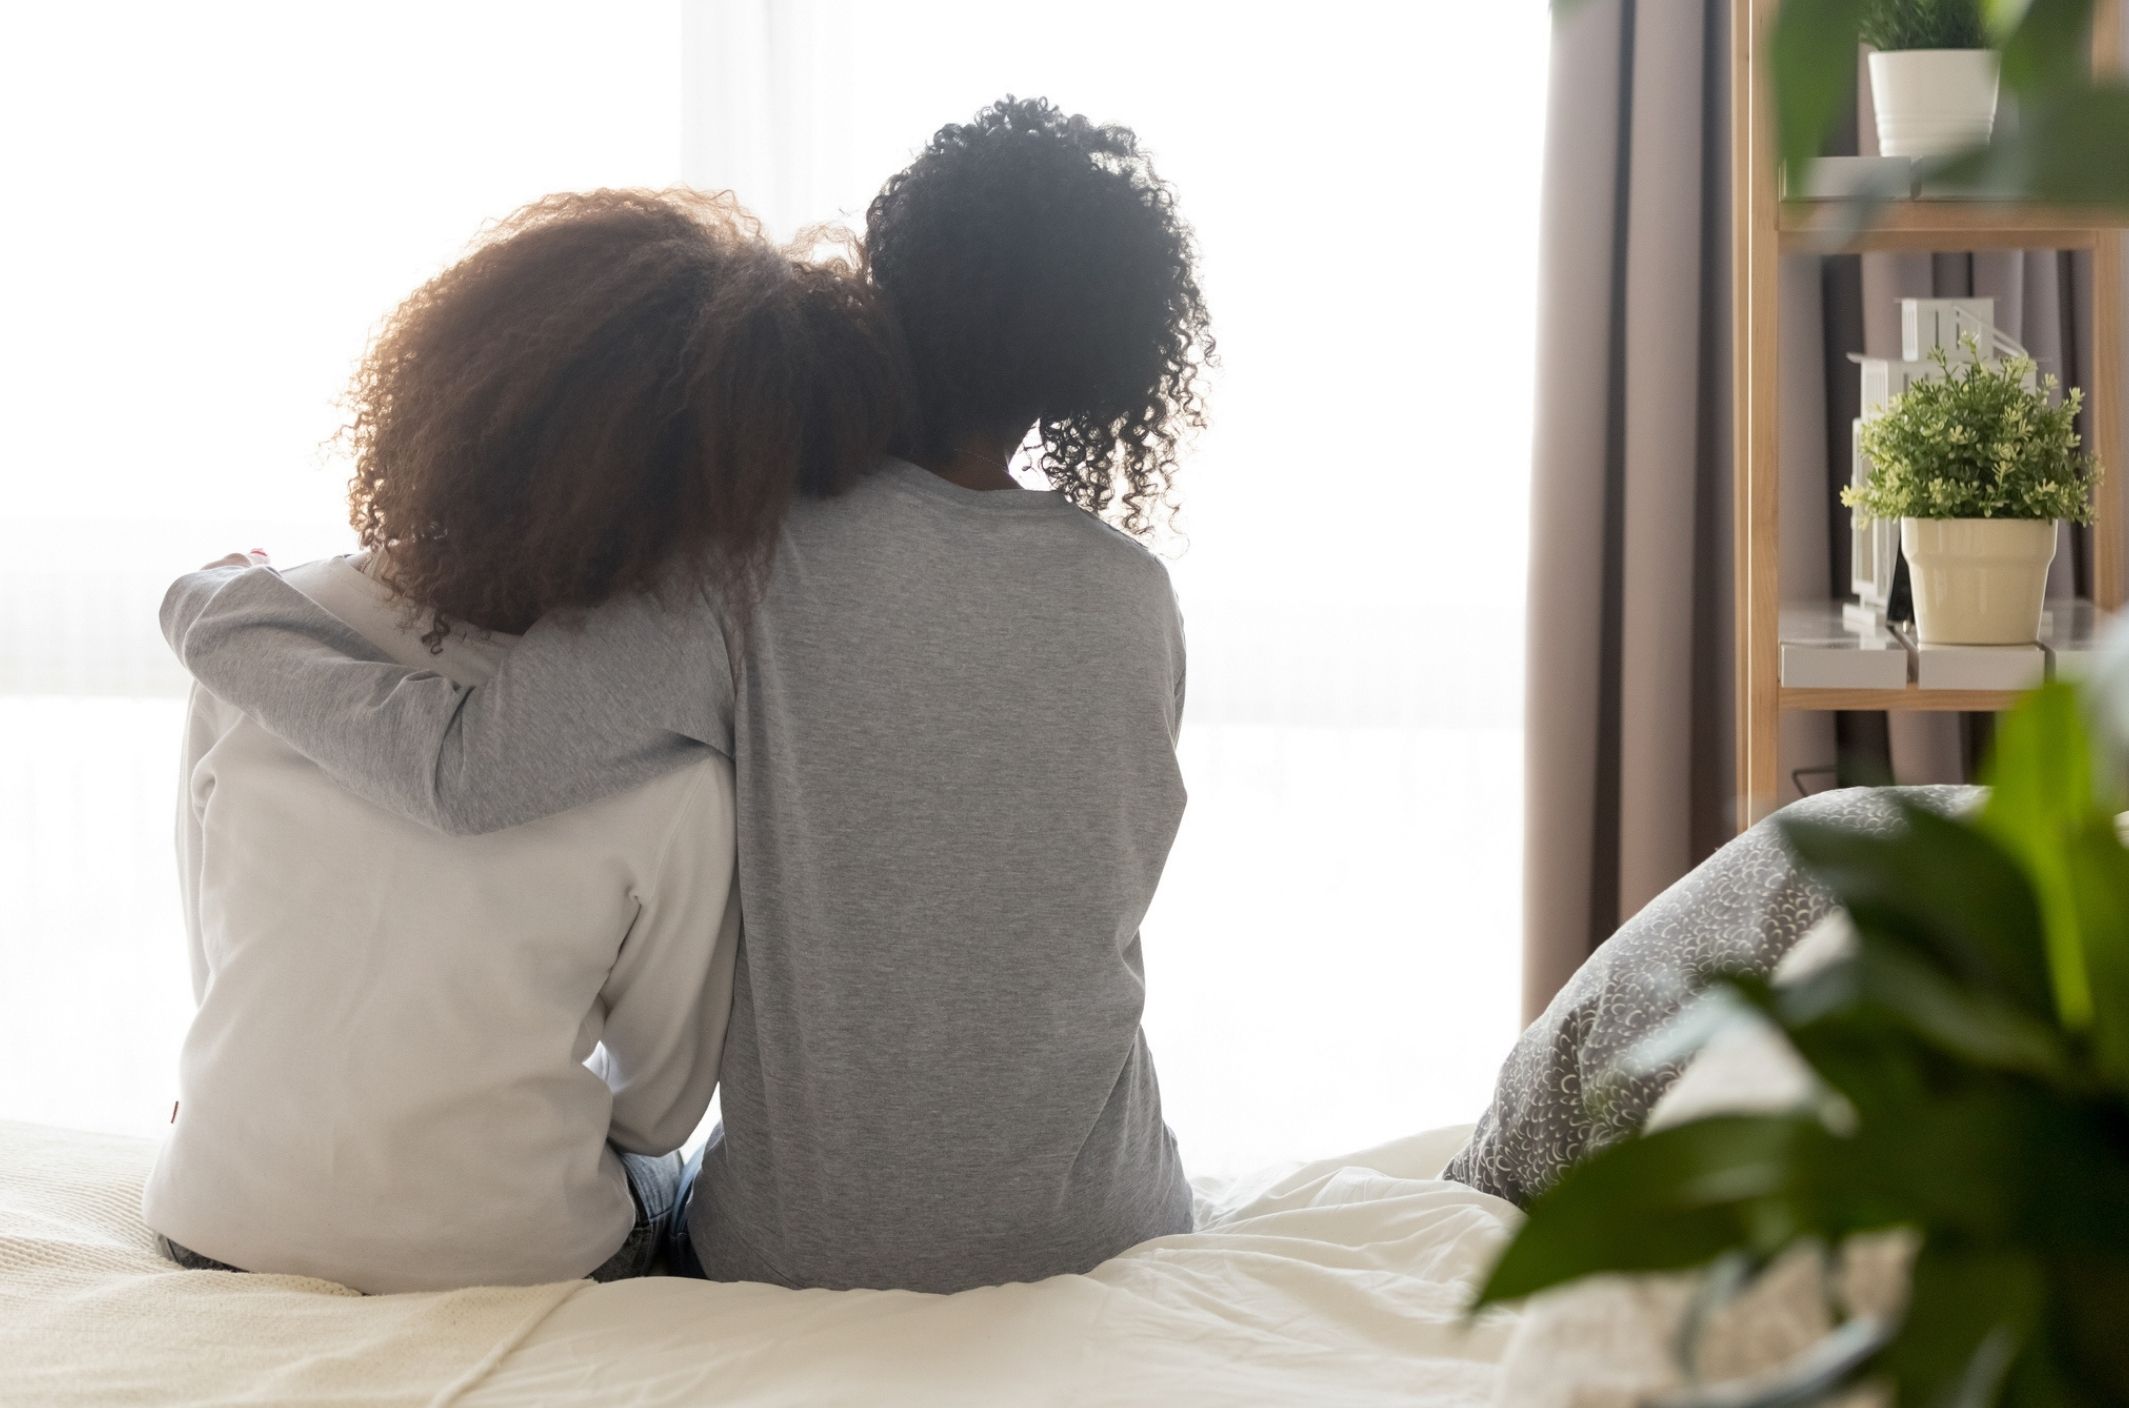 black women on bed support each other to cope with racial battle fatigue and racial trauma